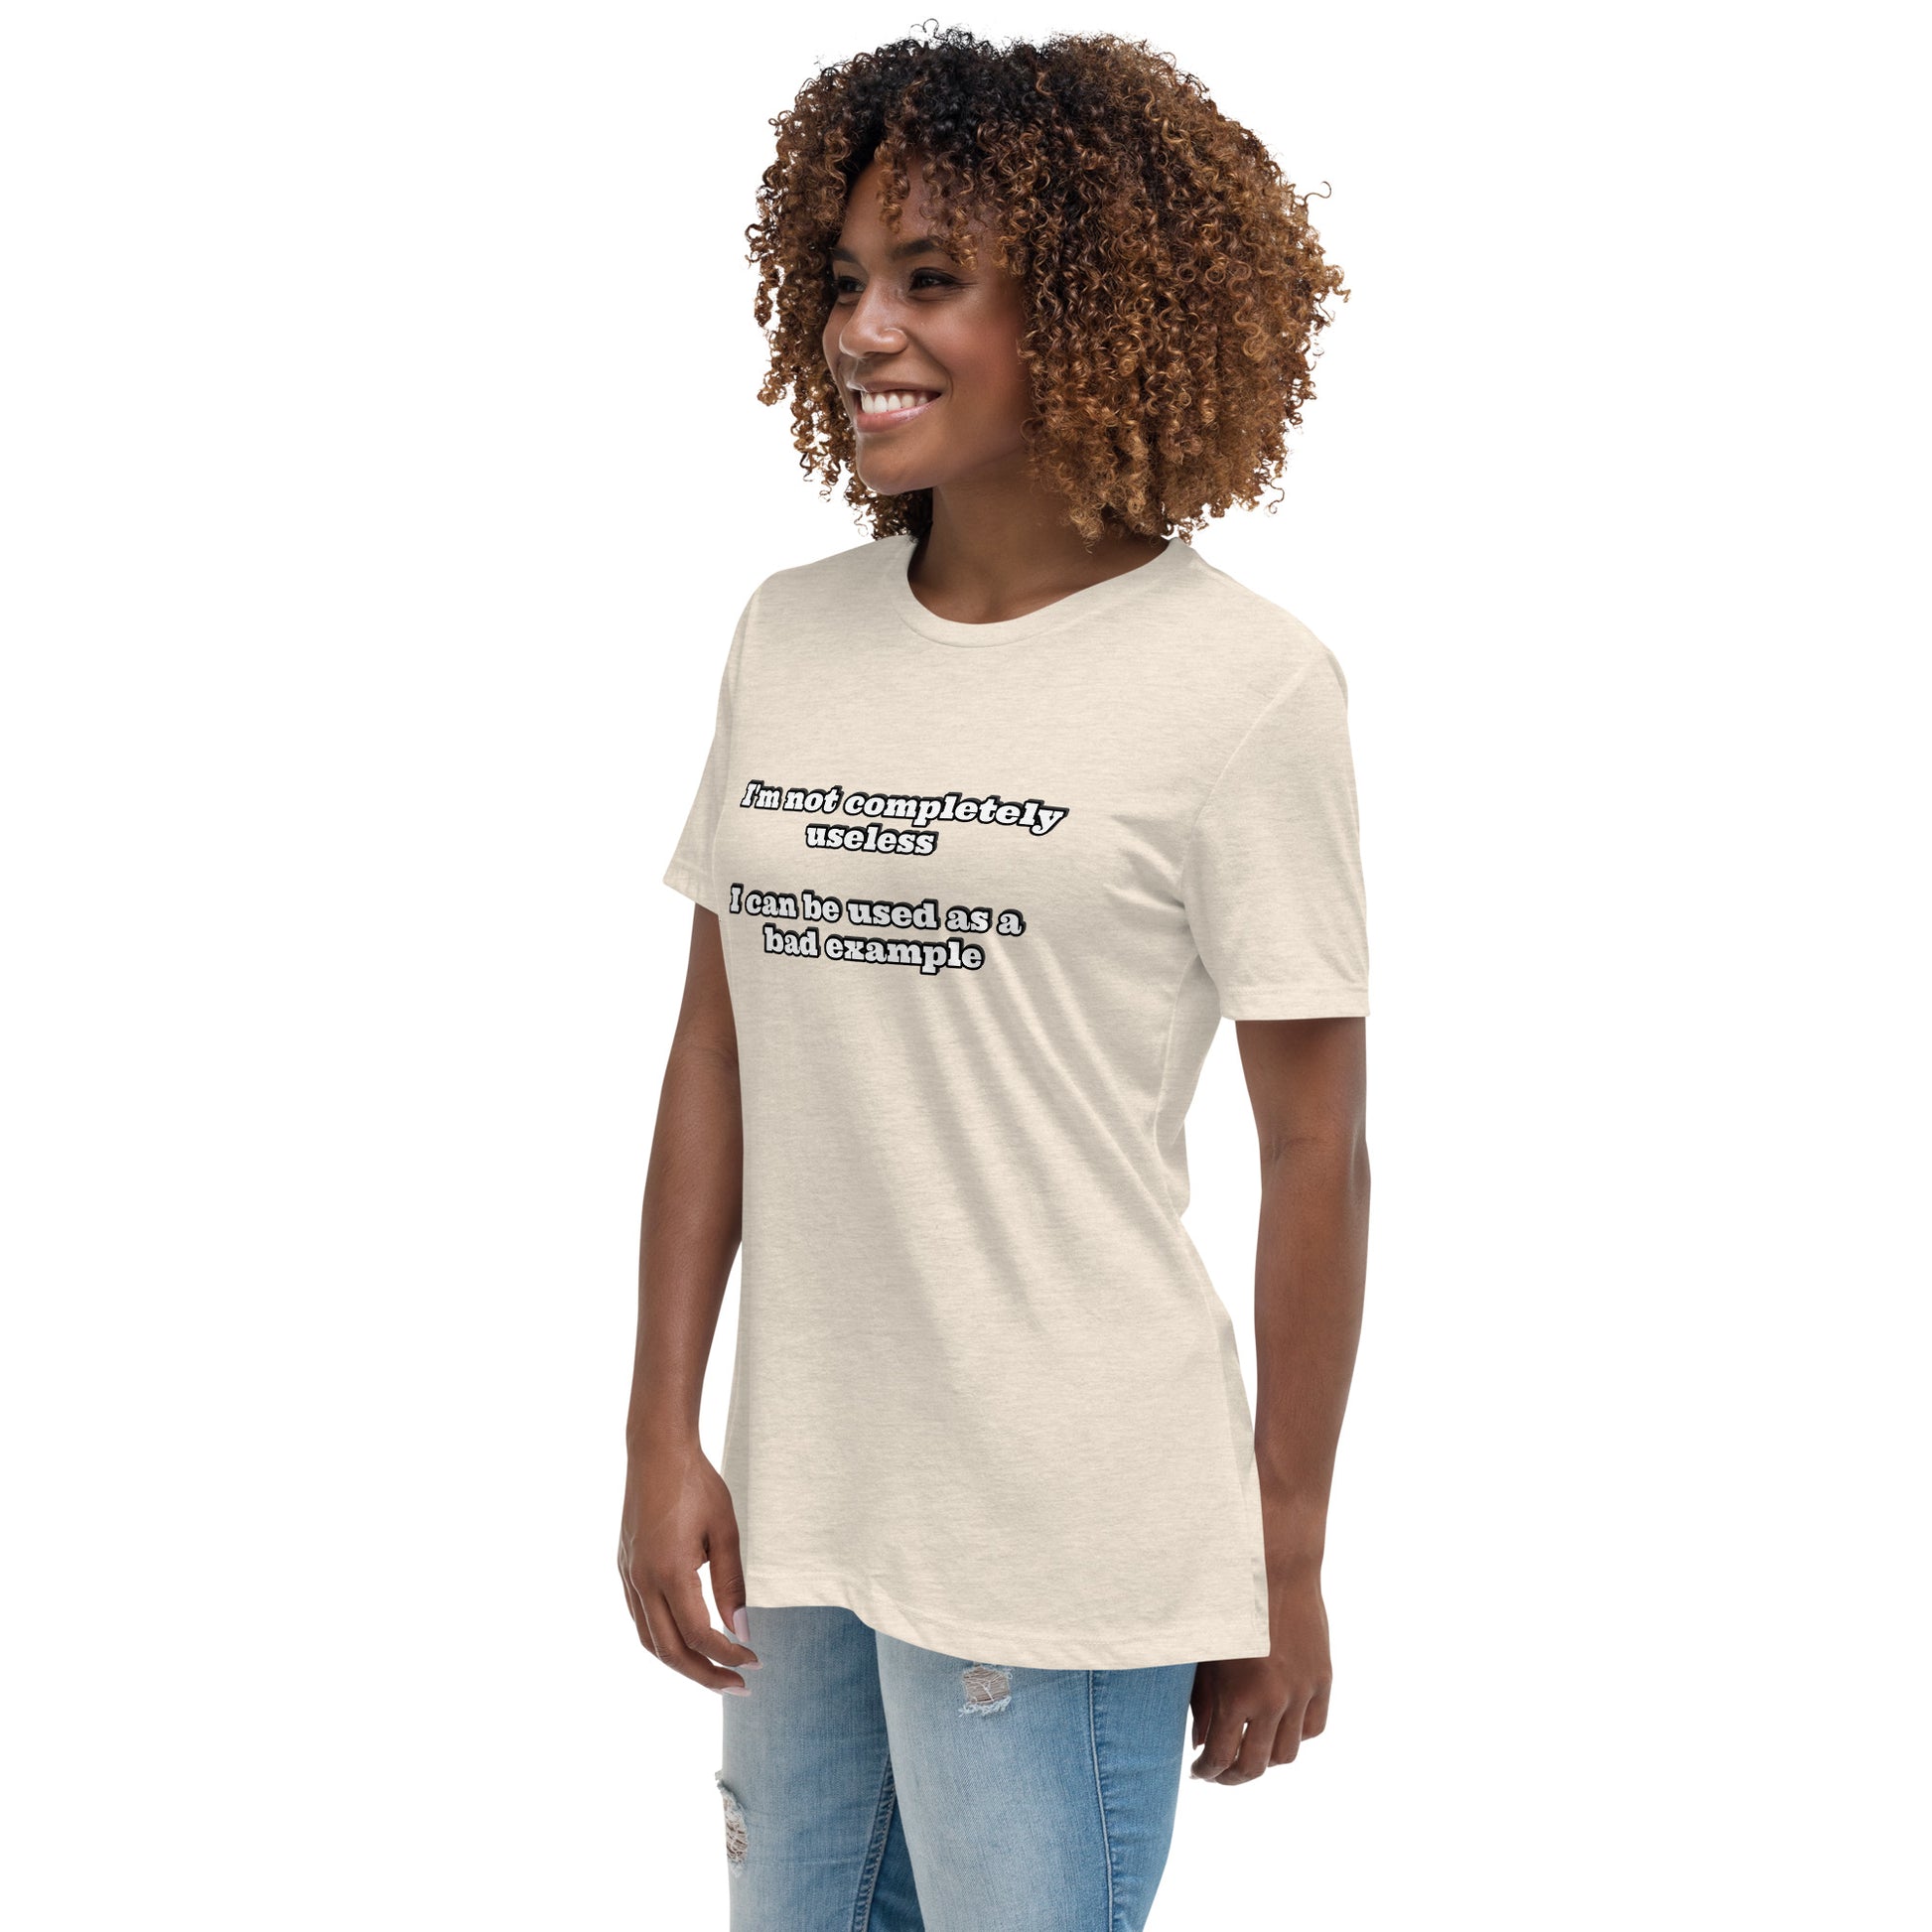 Women with prism natural t-shirt with text “I'm not completely useless I can be used as a bad example”